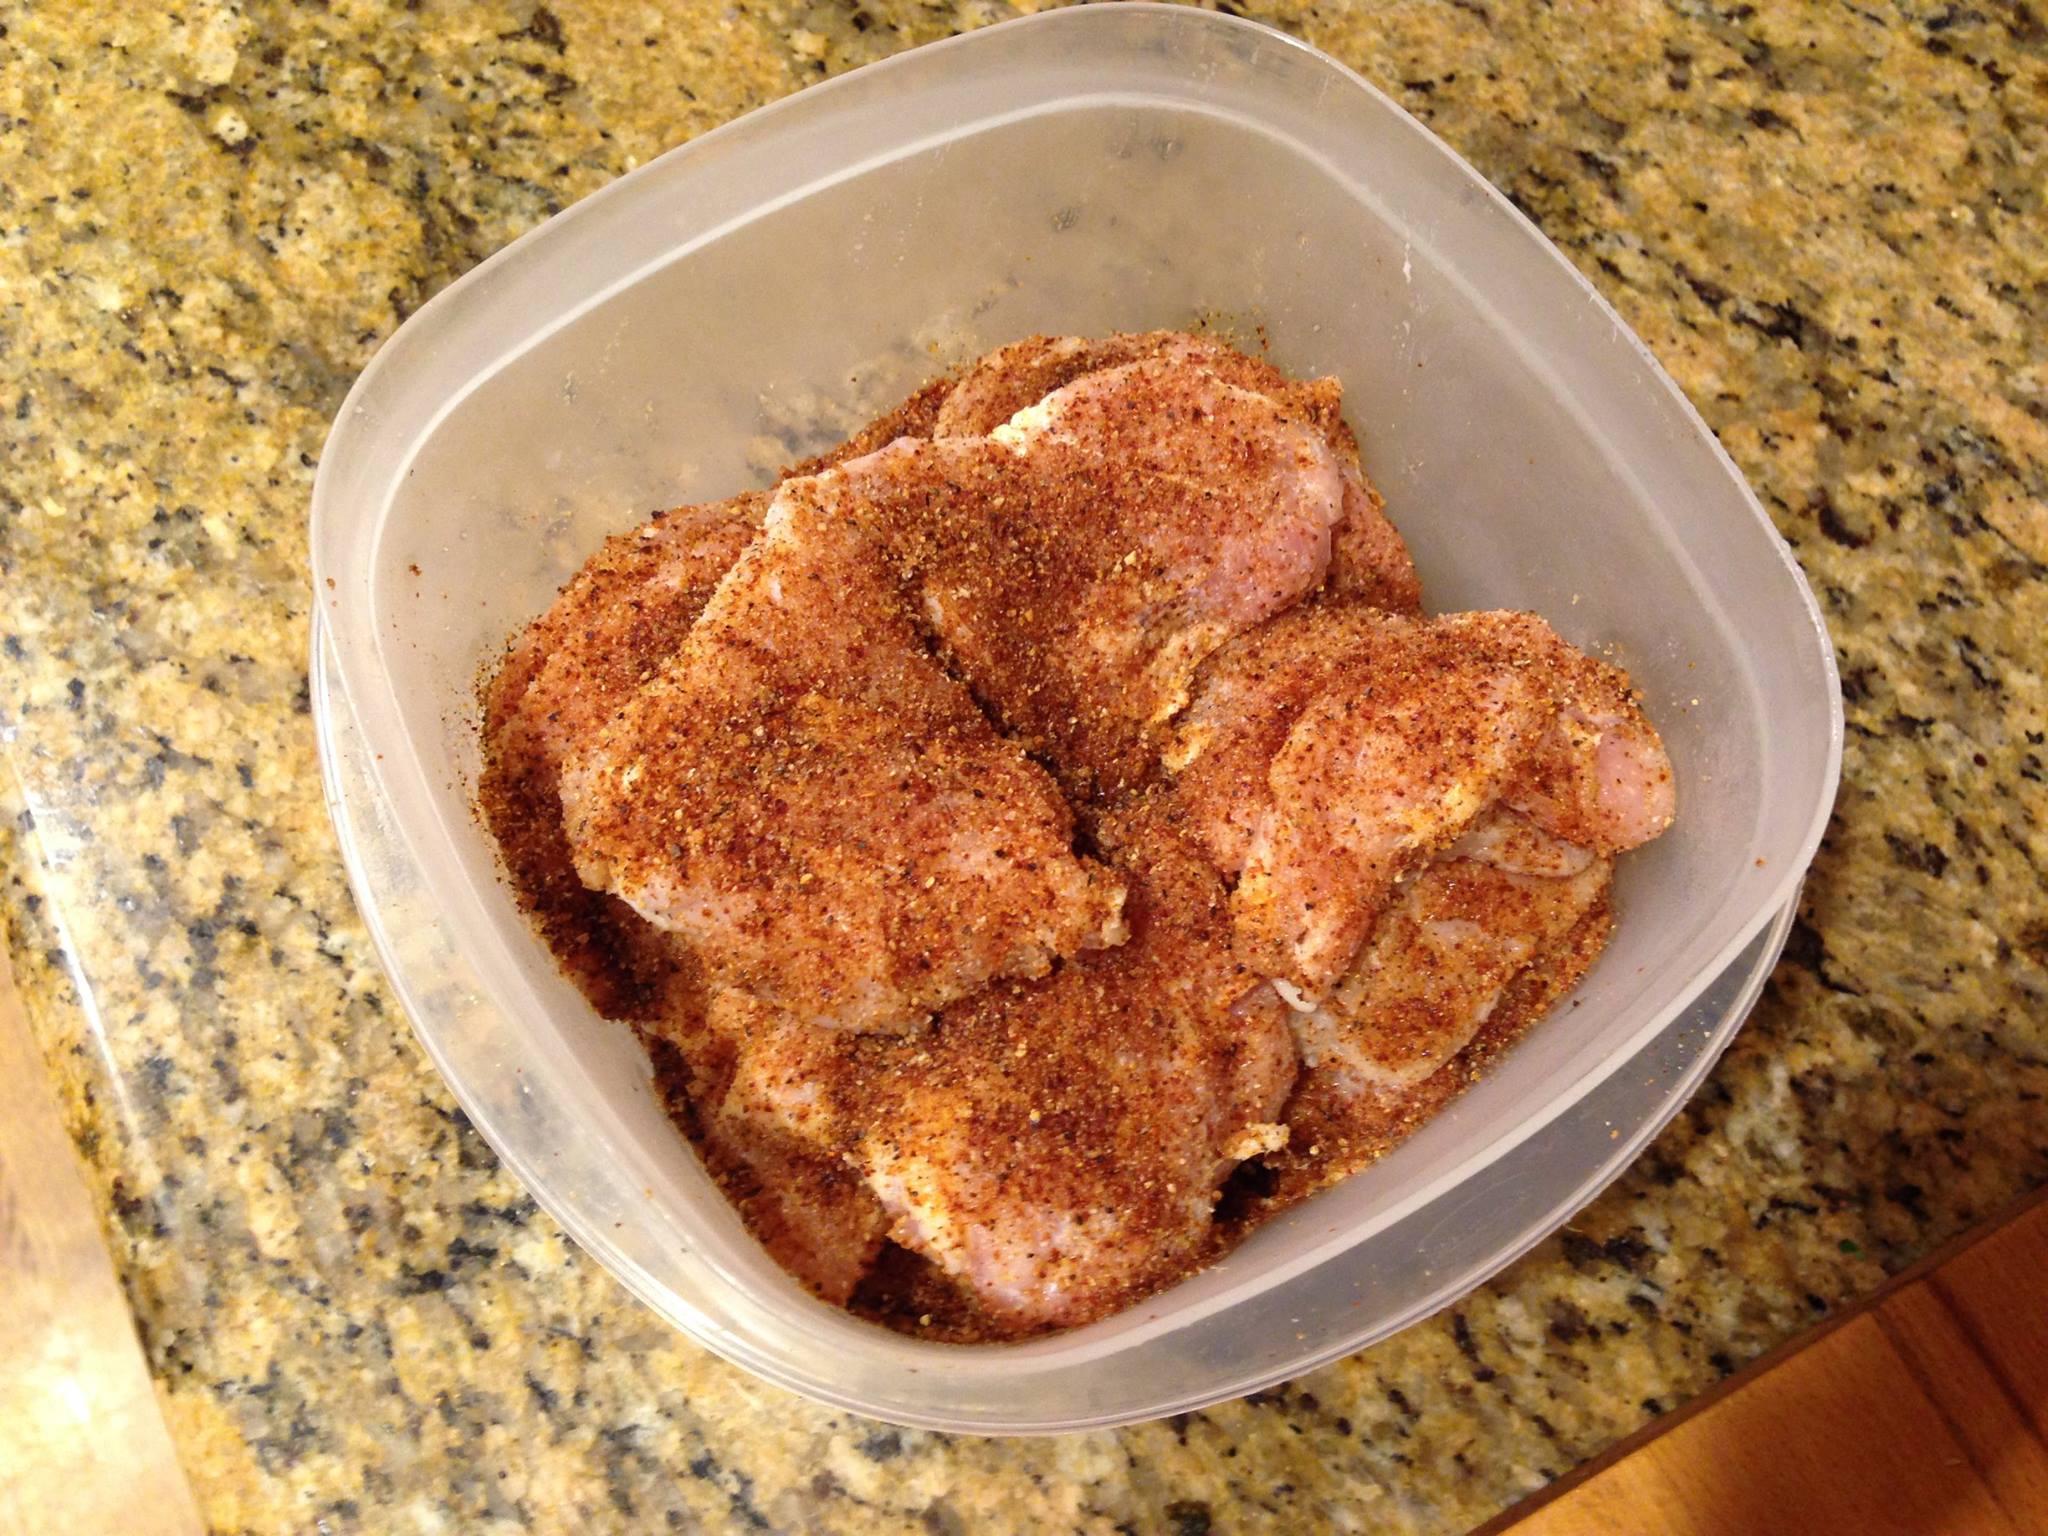 The chicken thighs after two hours of brining in the rub (in the fridge)